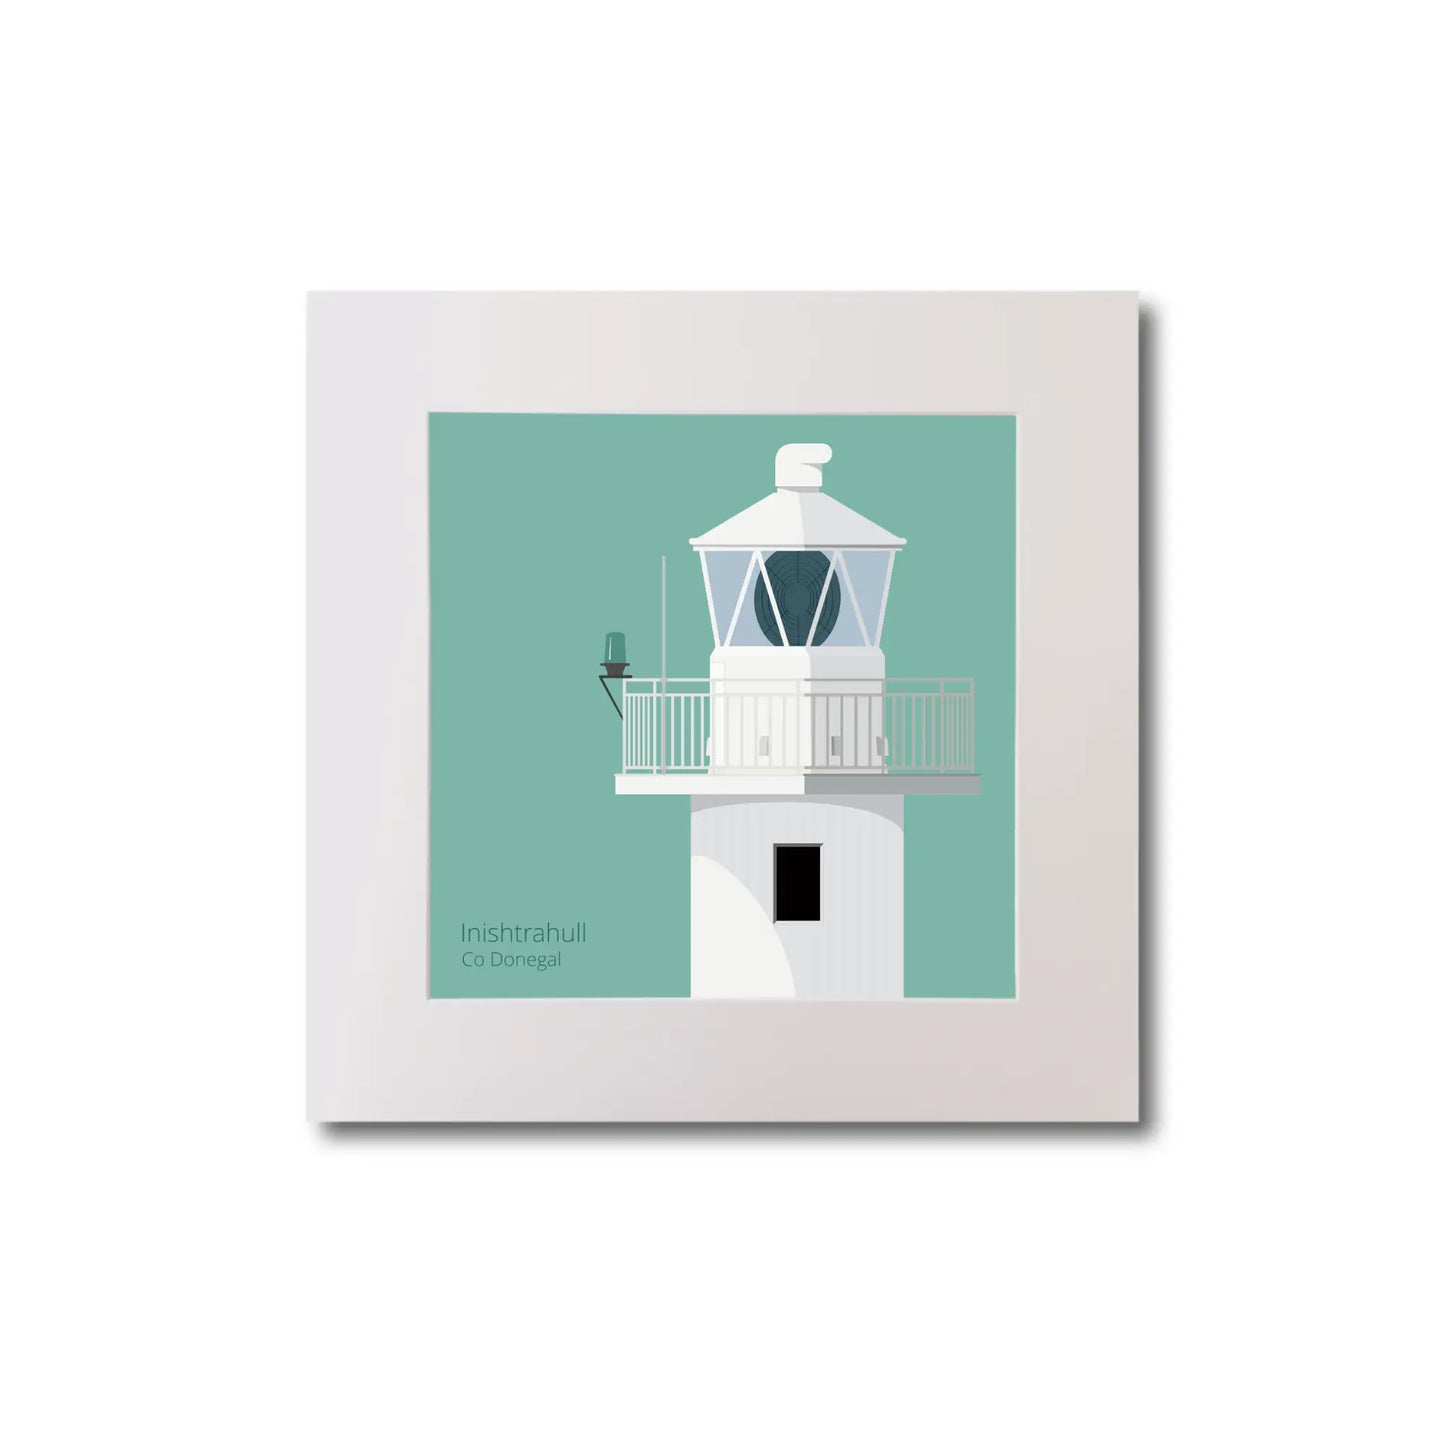 Illustration of Inishtrahull lighthouse on an ocean green background, mounted and measuring 20x20cm.